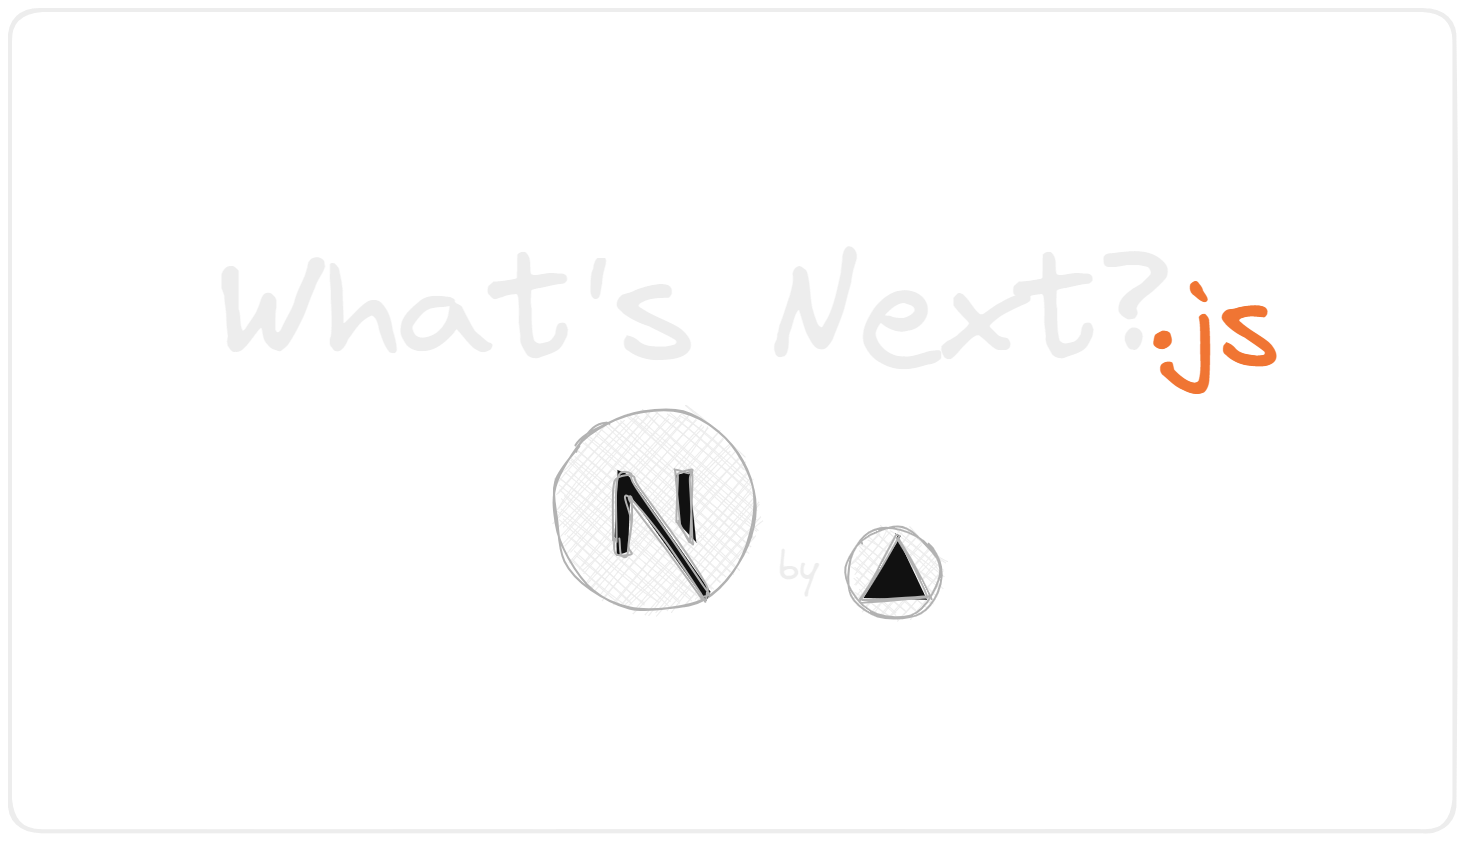 What is Next.js?